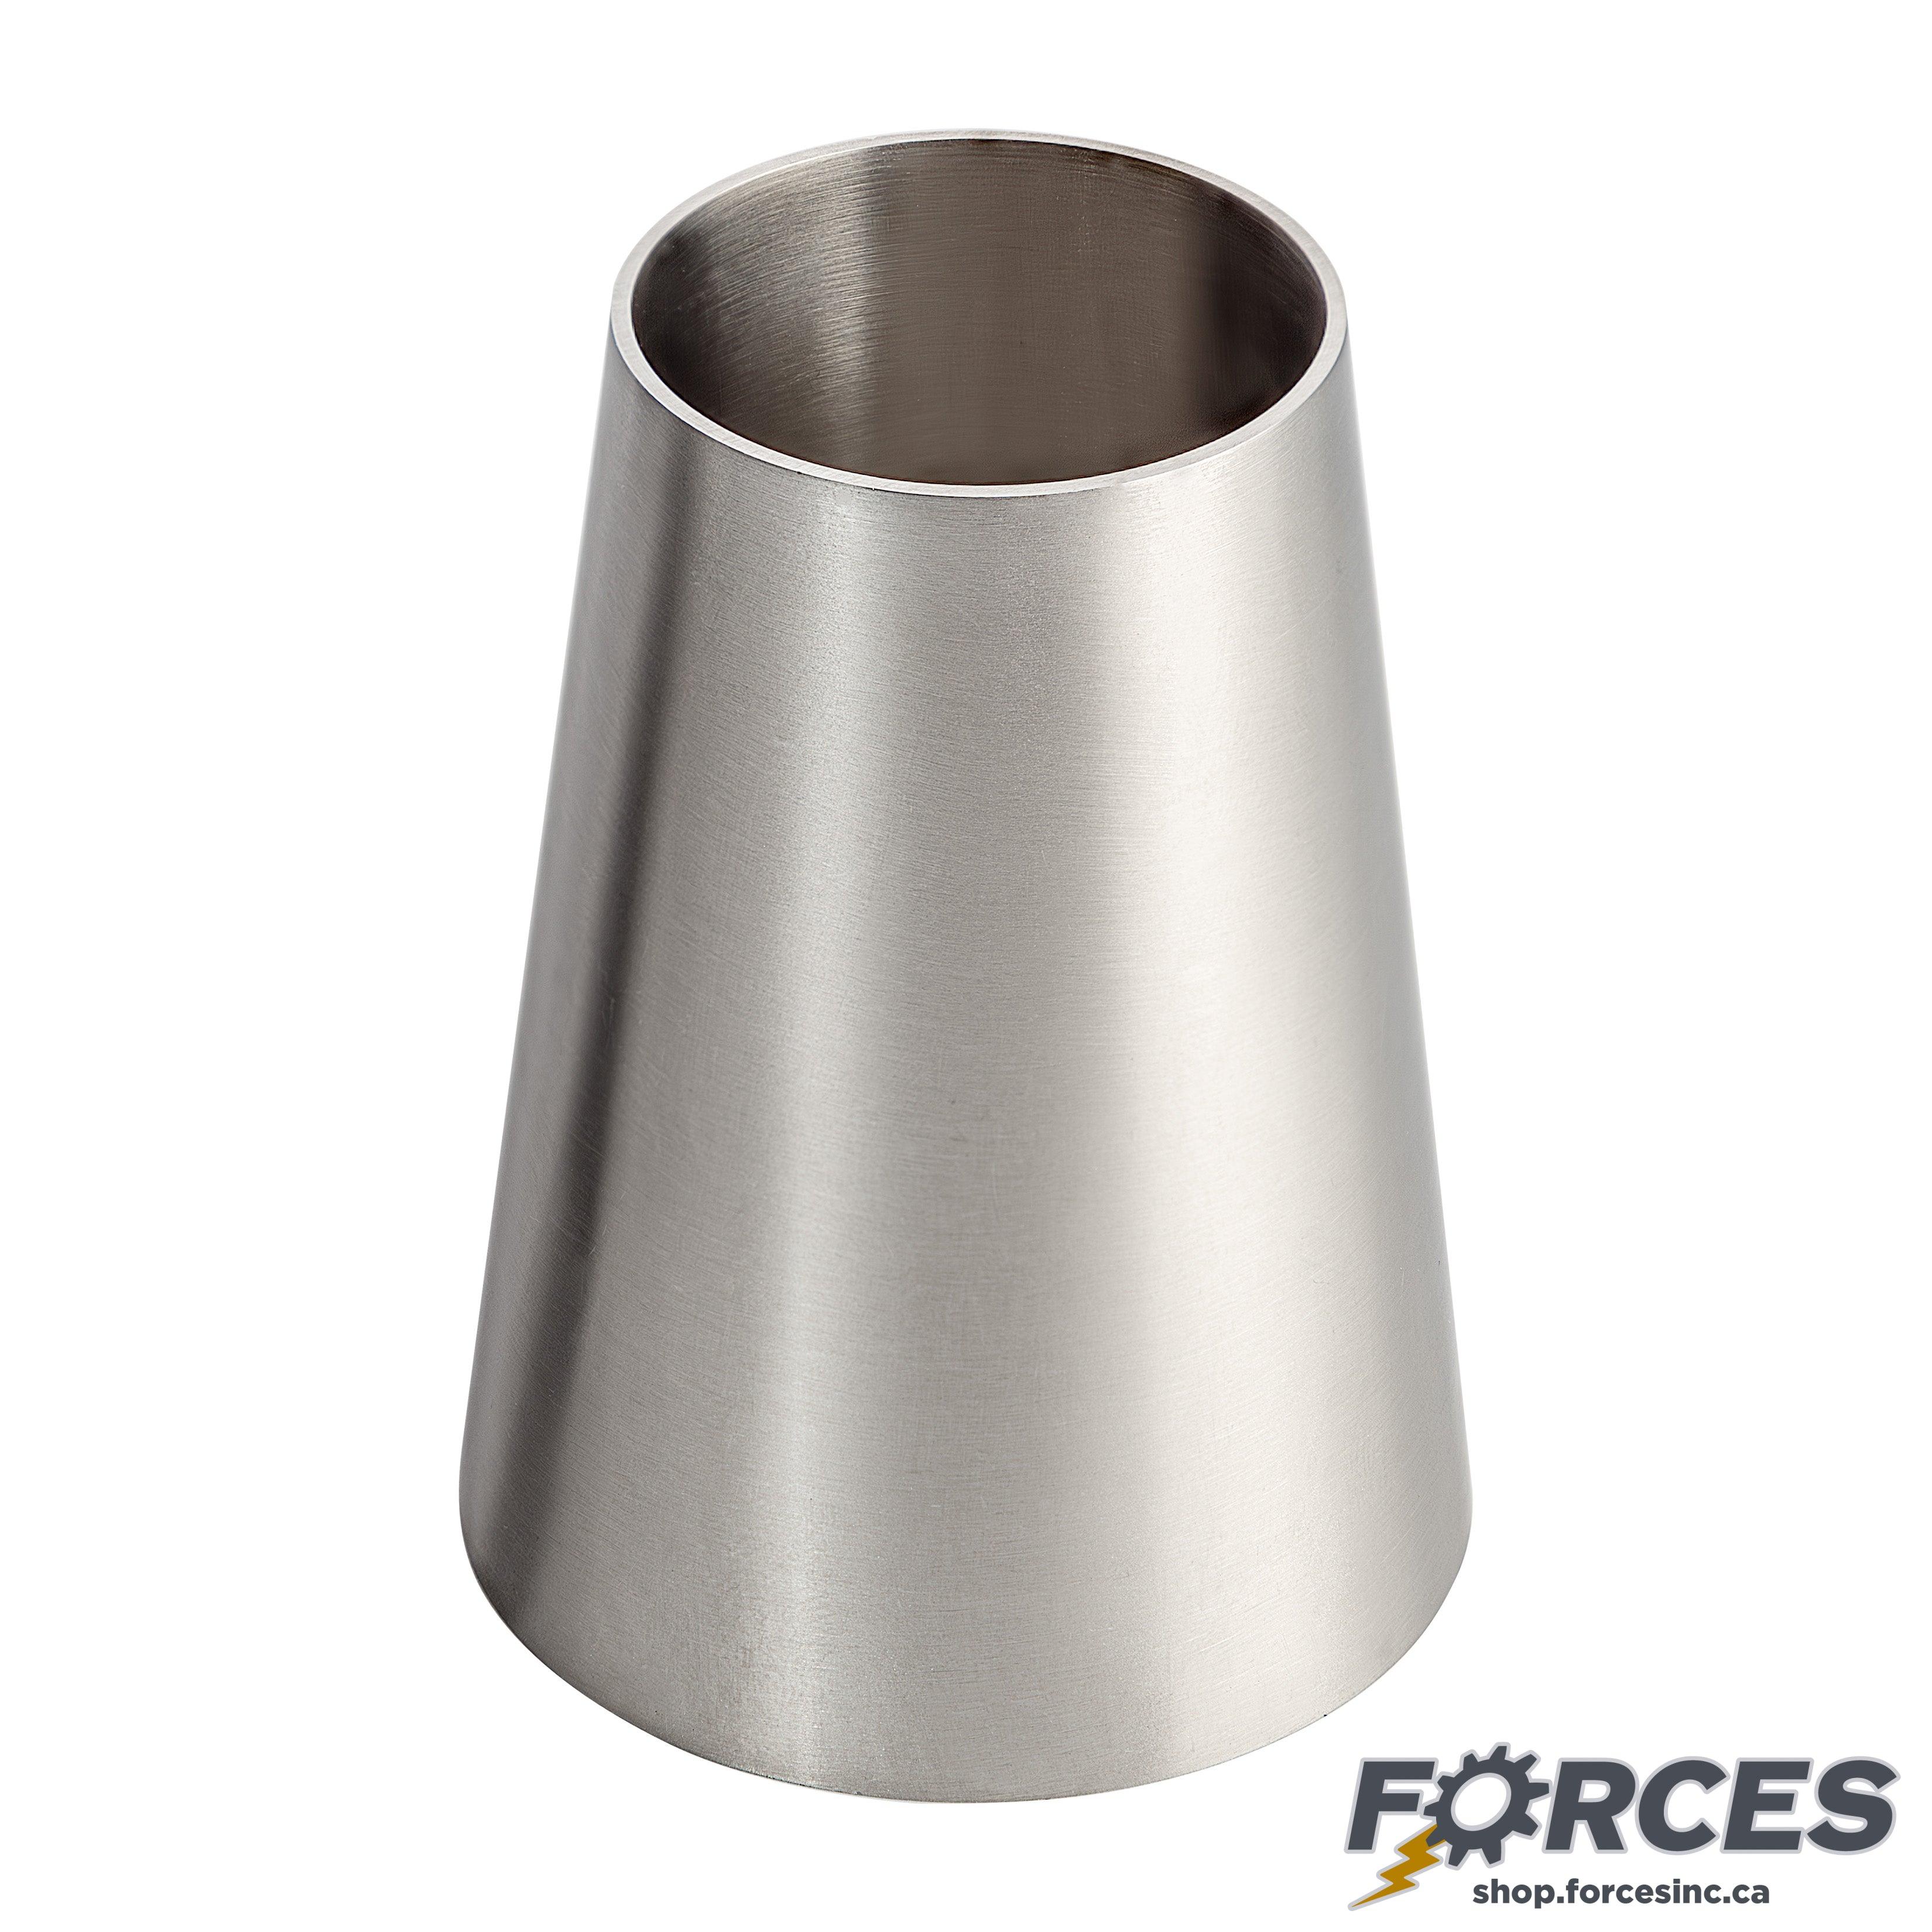 1" x 3/4" Butt Weld Concentric Reducer - Stainless Steel 316 - Forces Inc